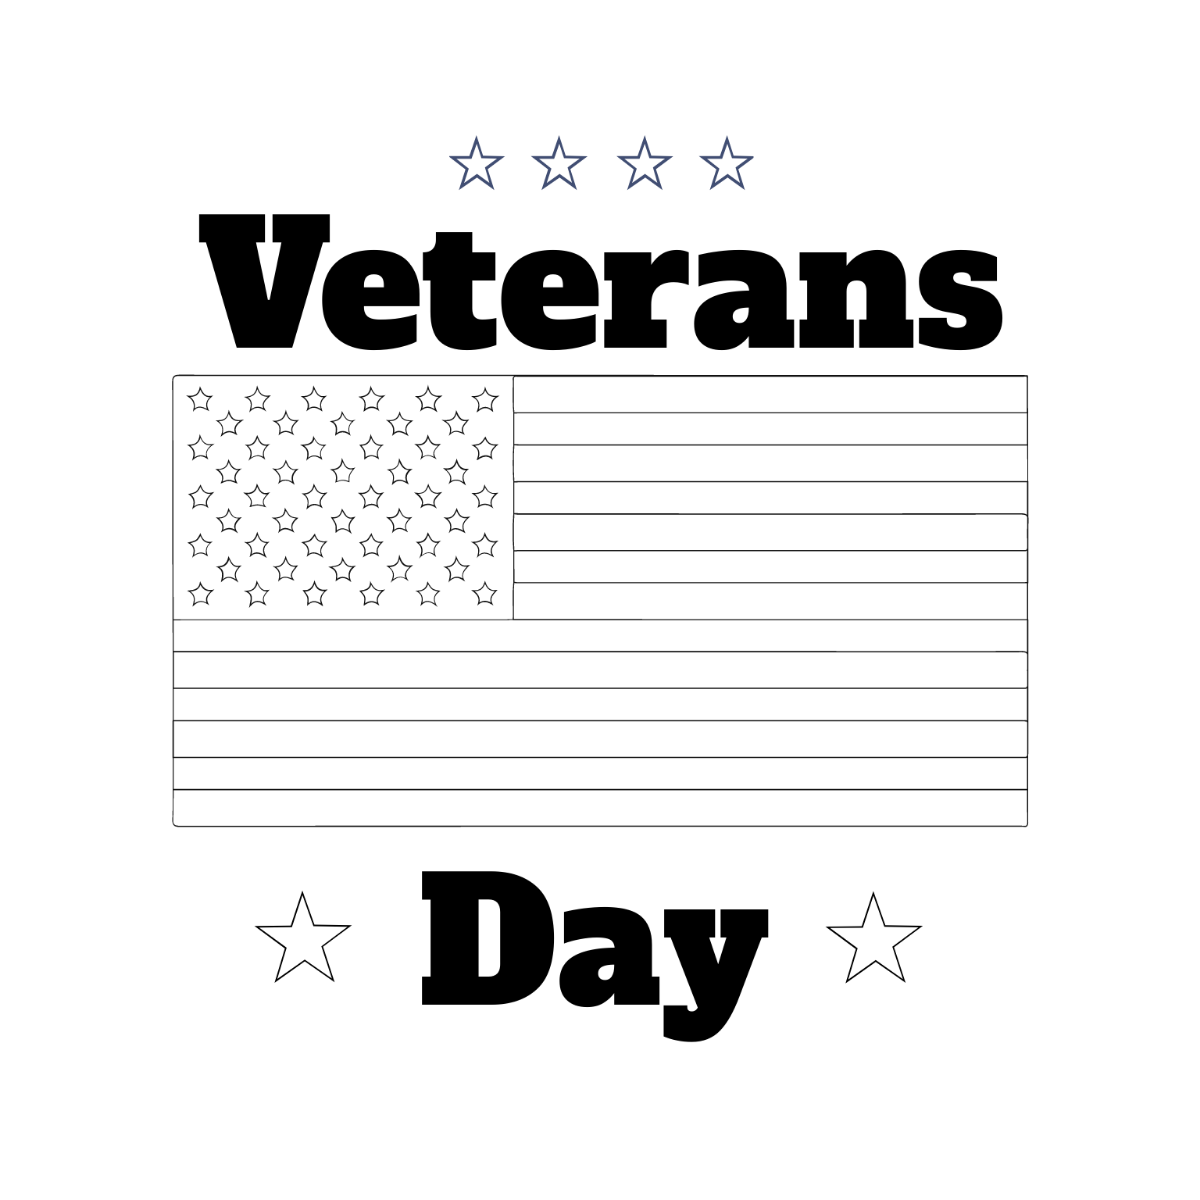 Veterans Day Drawing